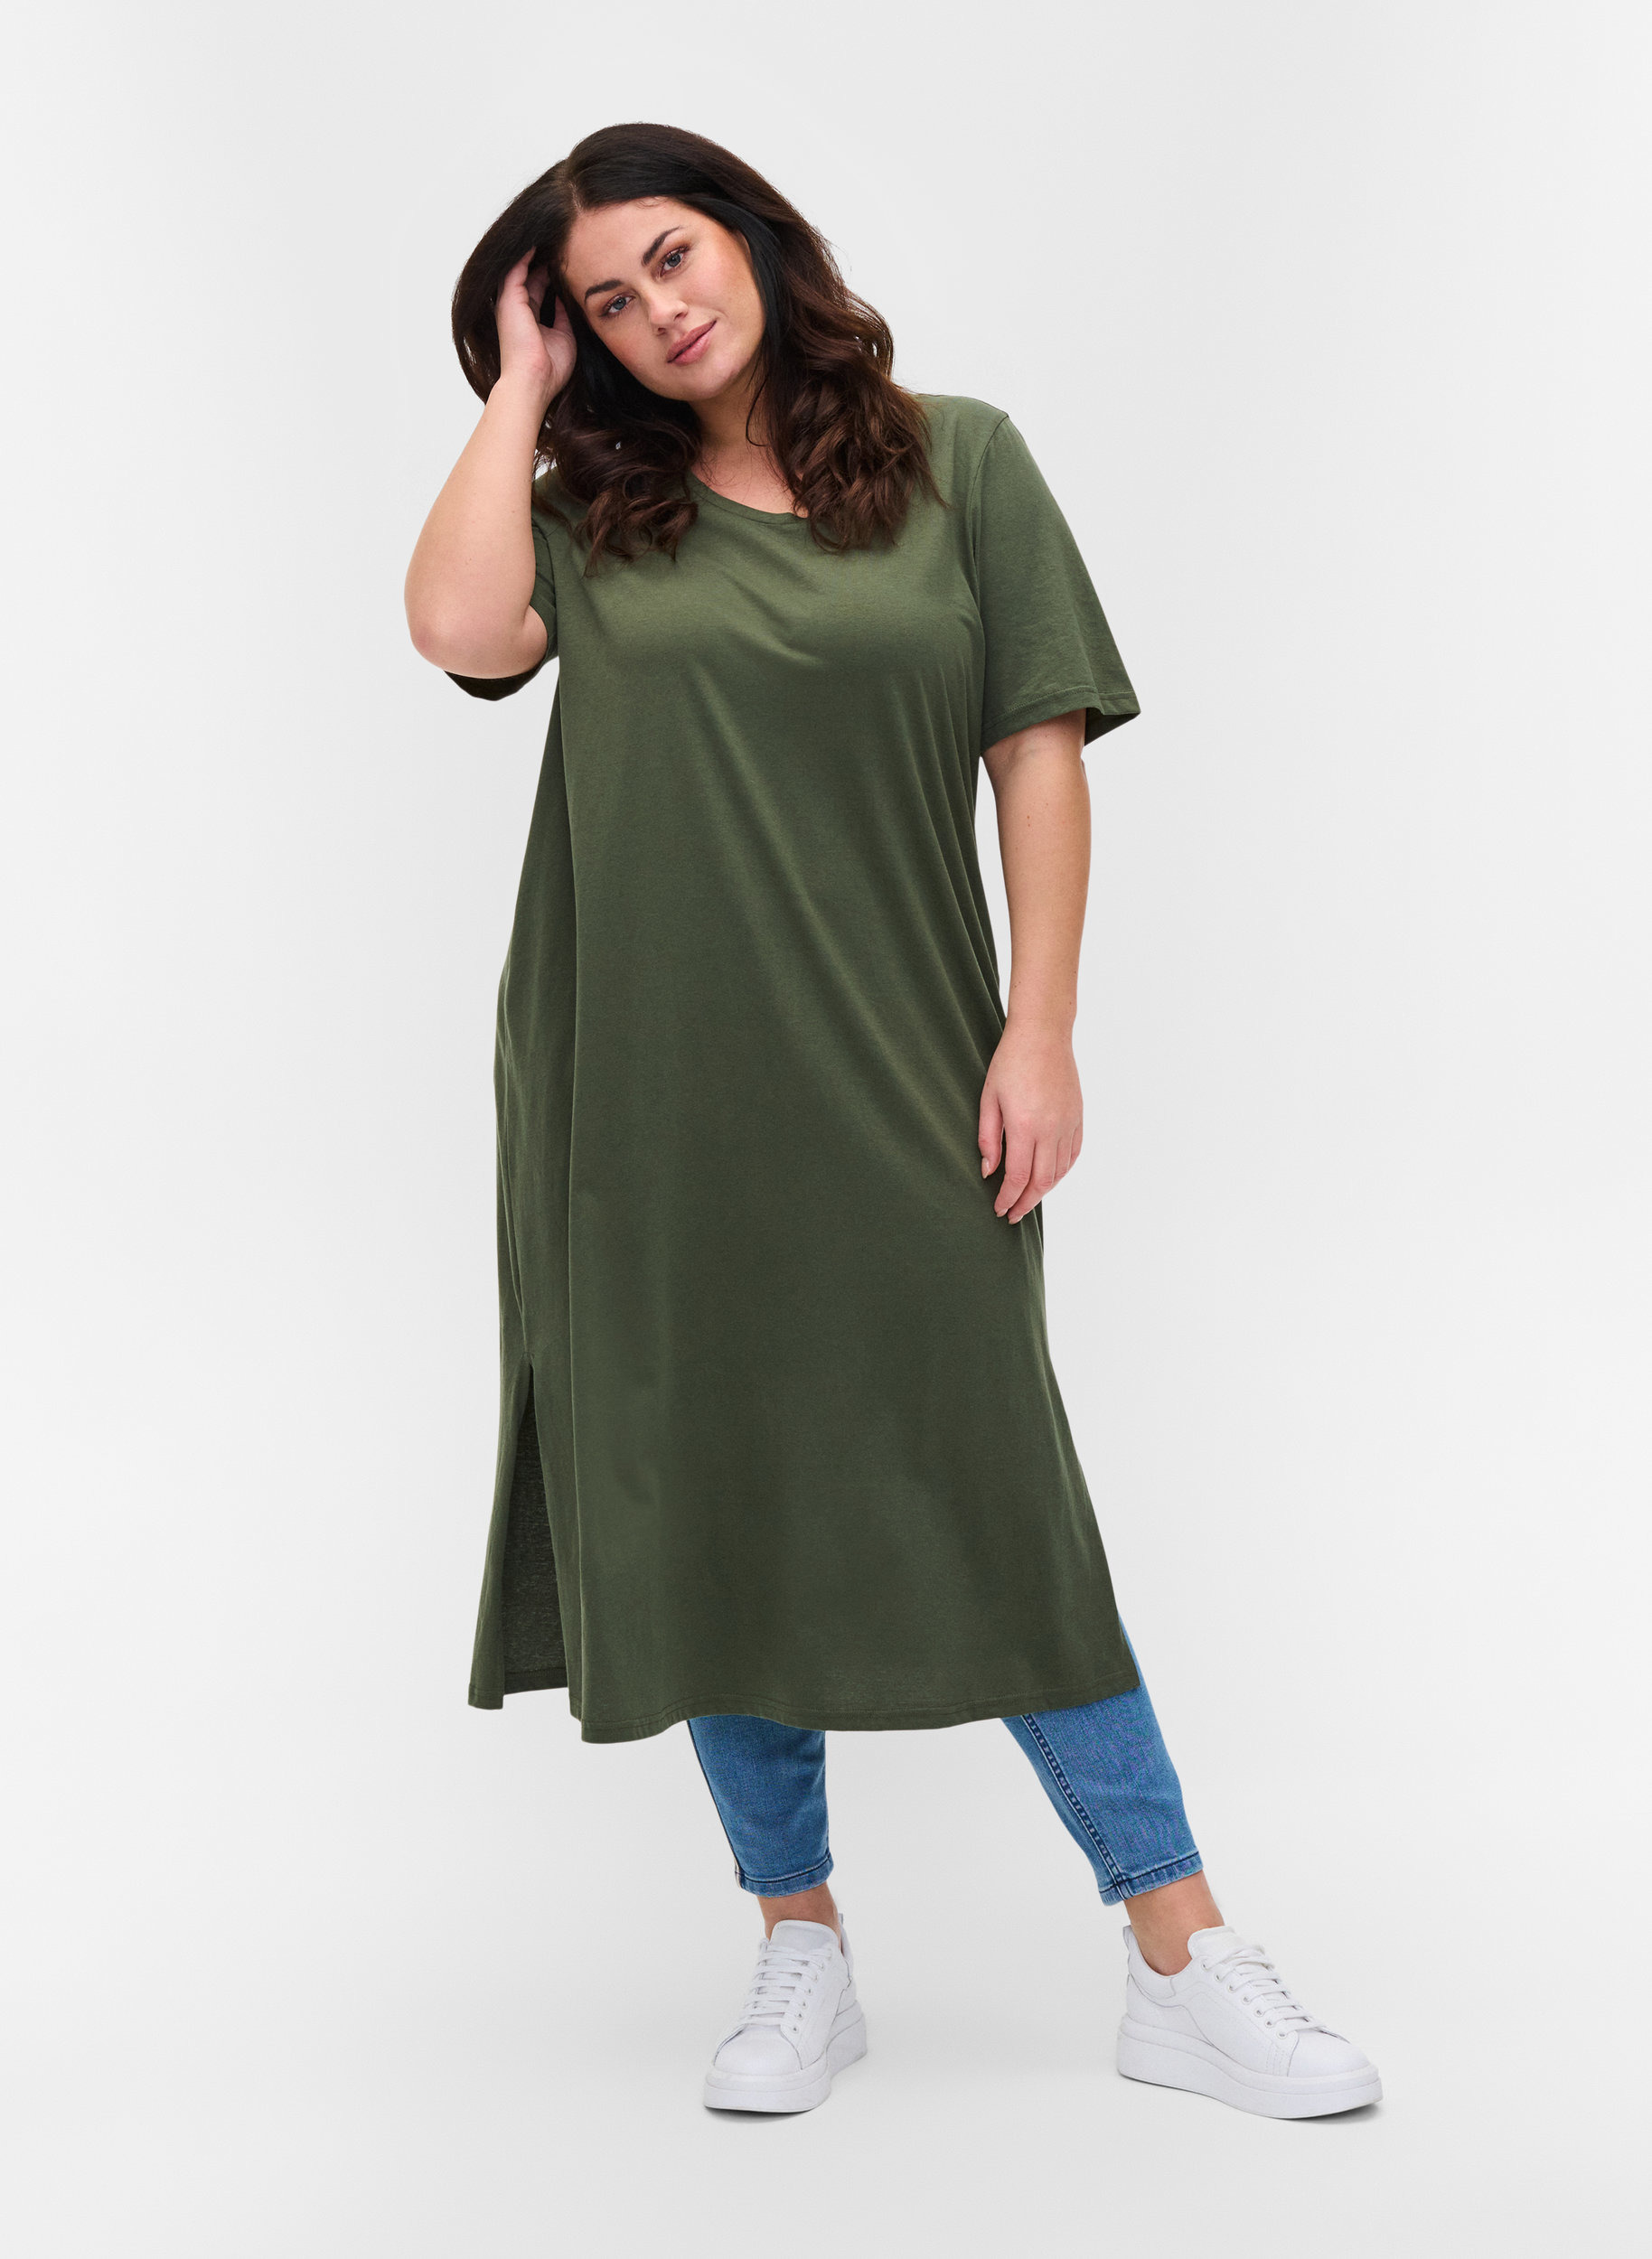 Cotton t-shirt dress with side slits ...